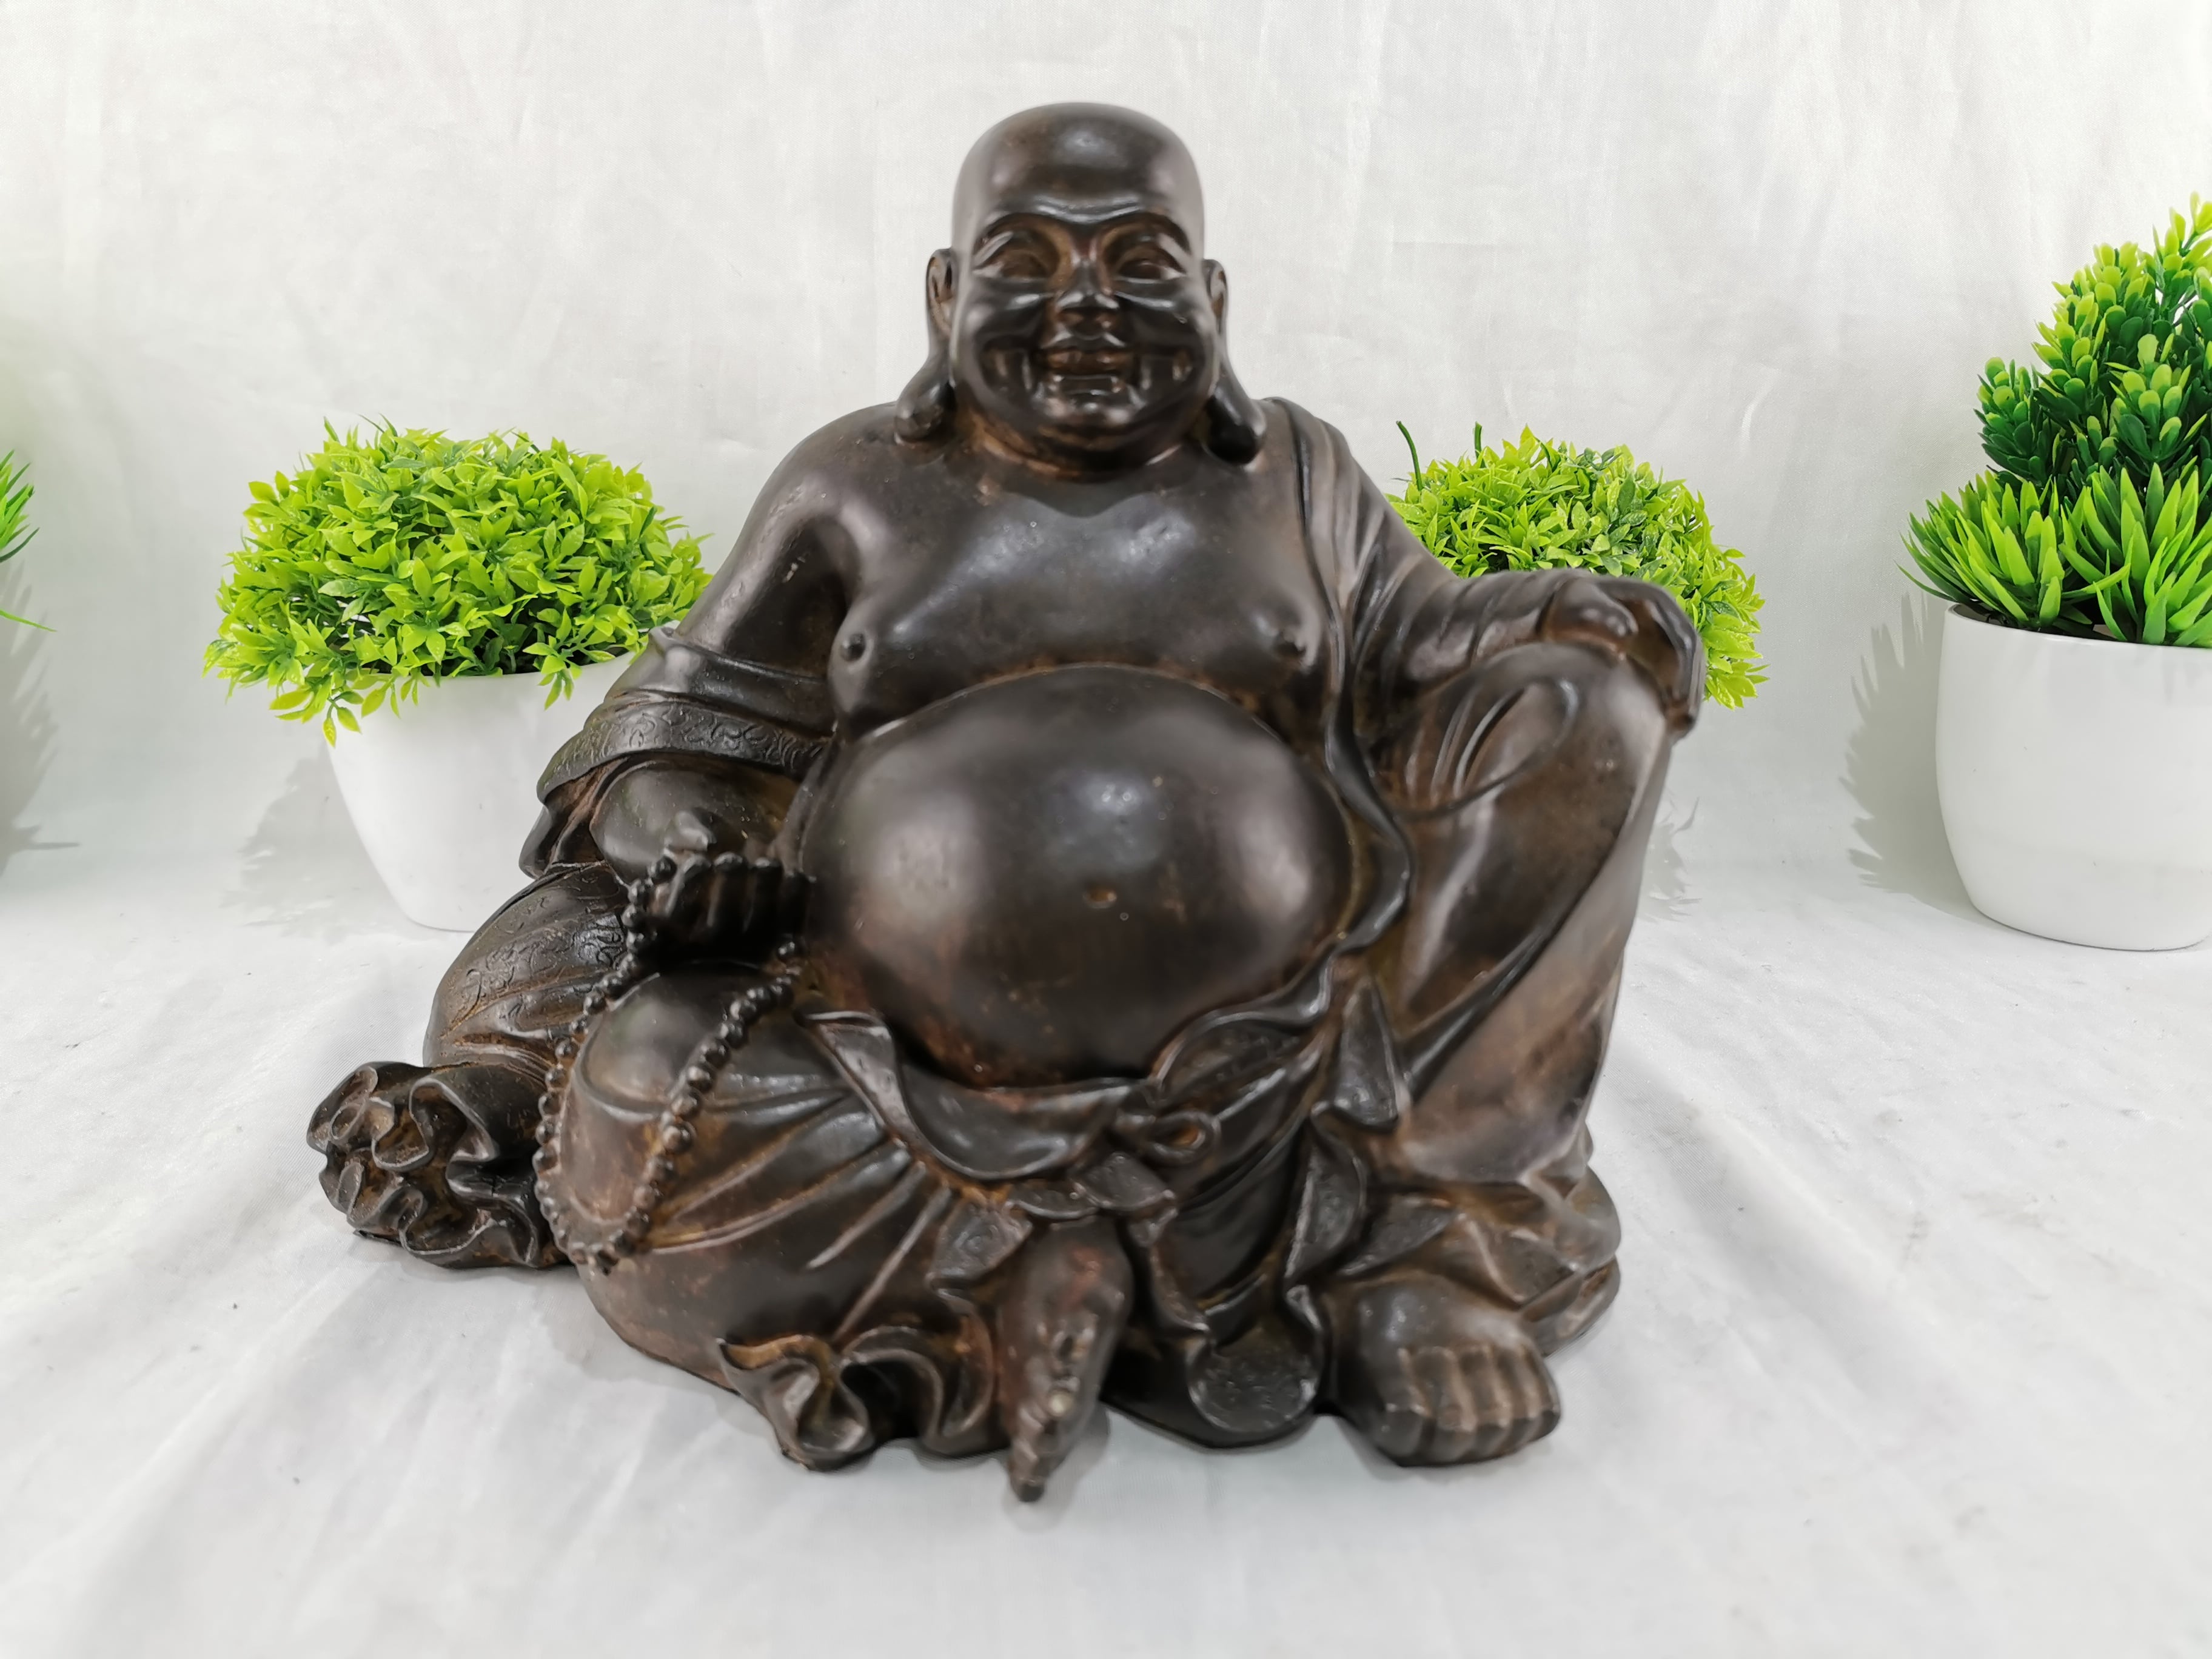 Lucky Big Belly Buddha Figurine Sculpture - Home Decor, Collection